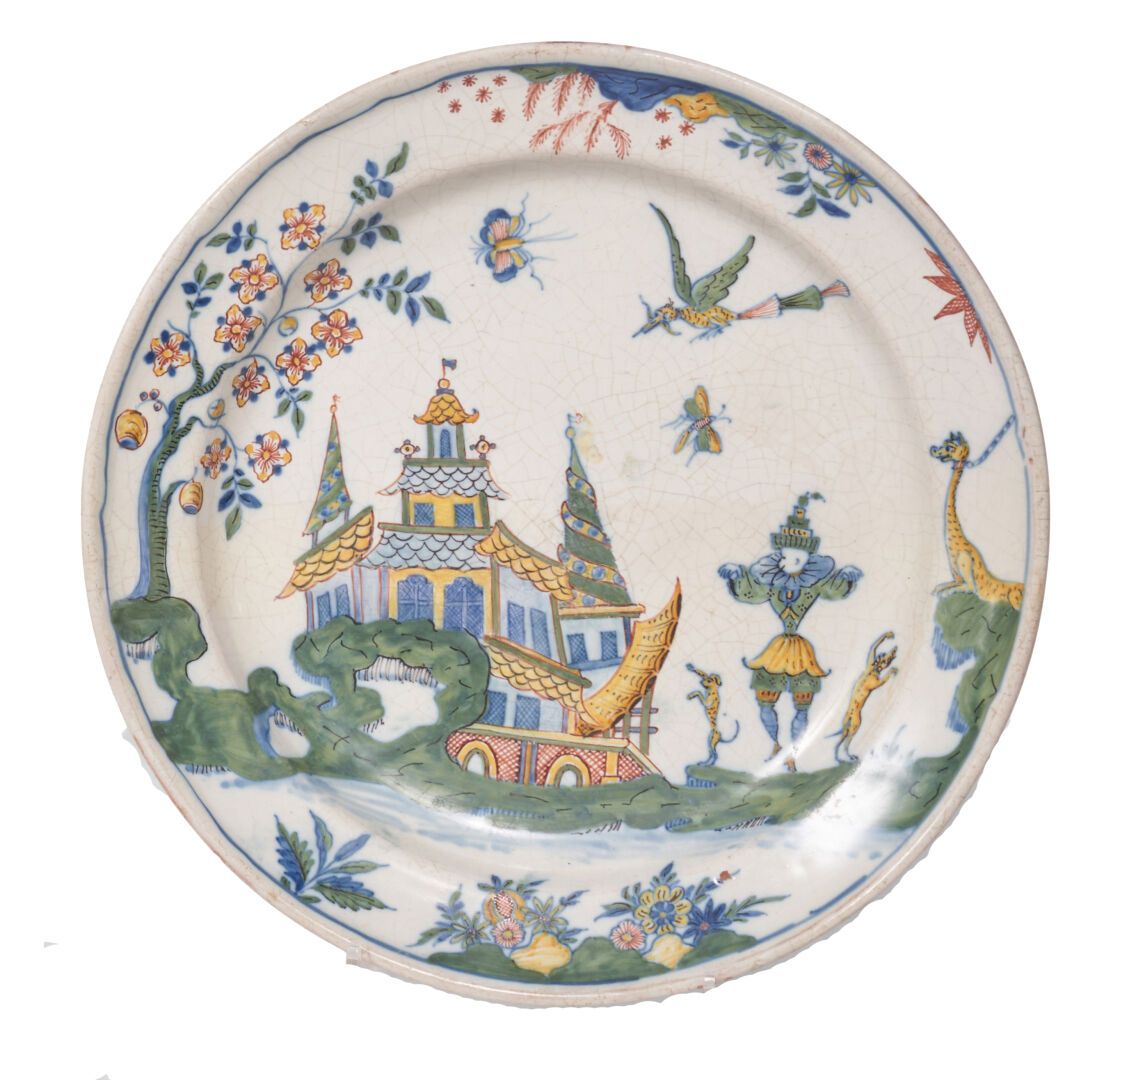 Null Marseille
Earthenware plate with polychrome decoration in full of a pagoda,&hellip;